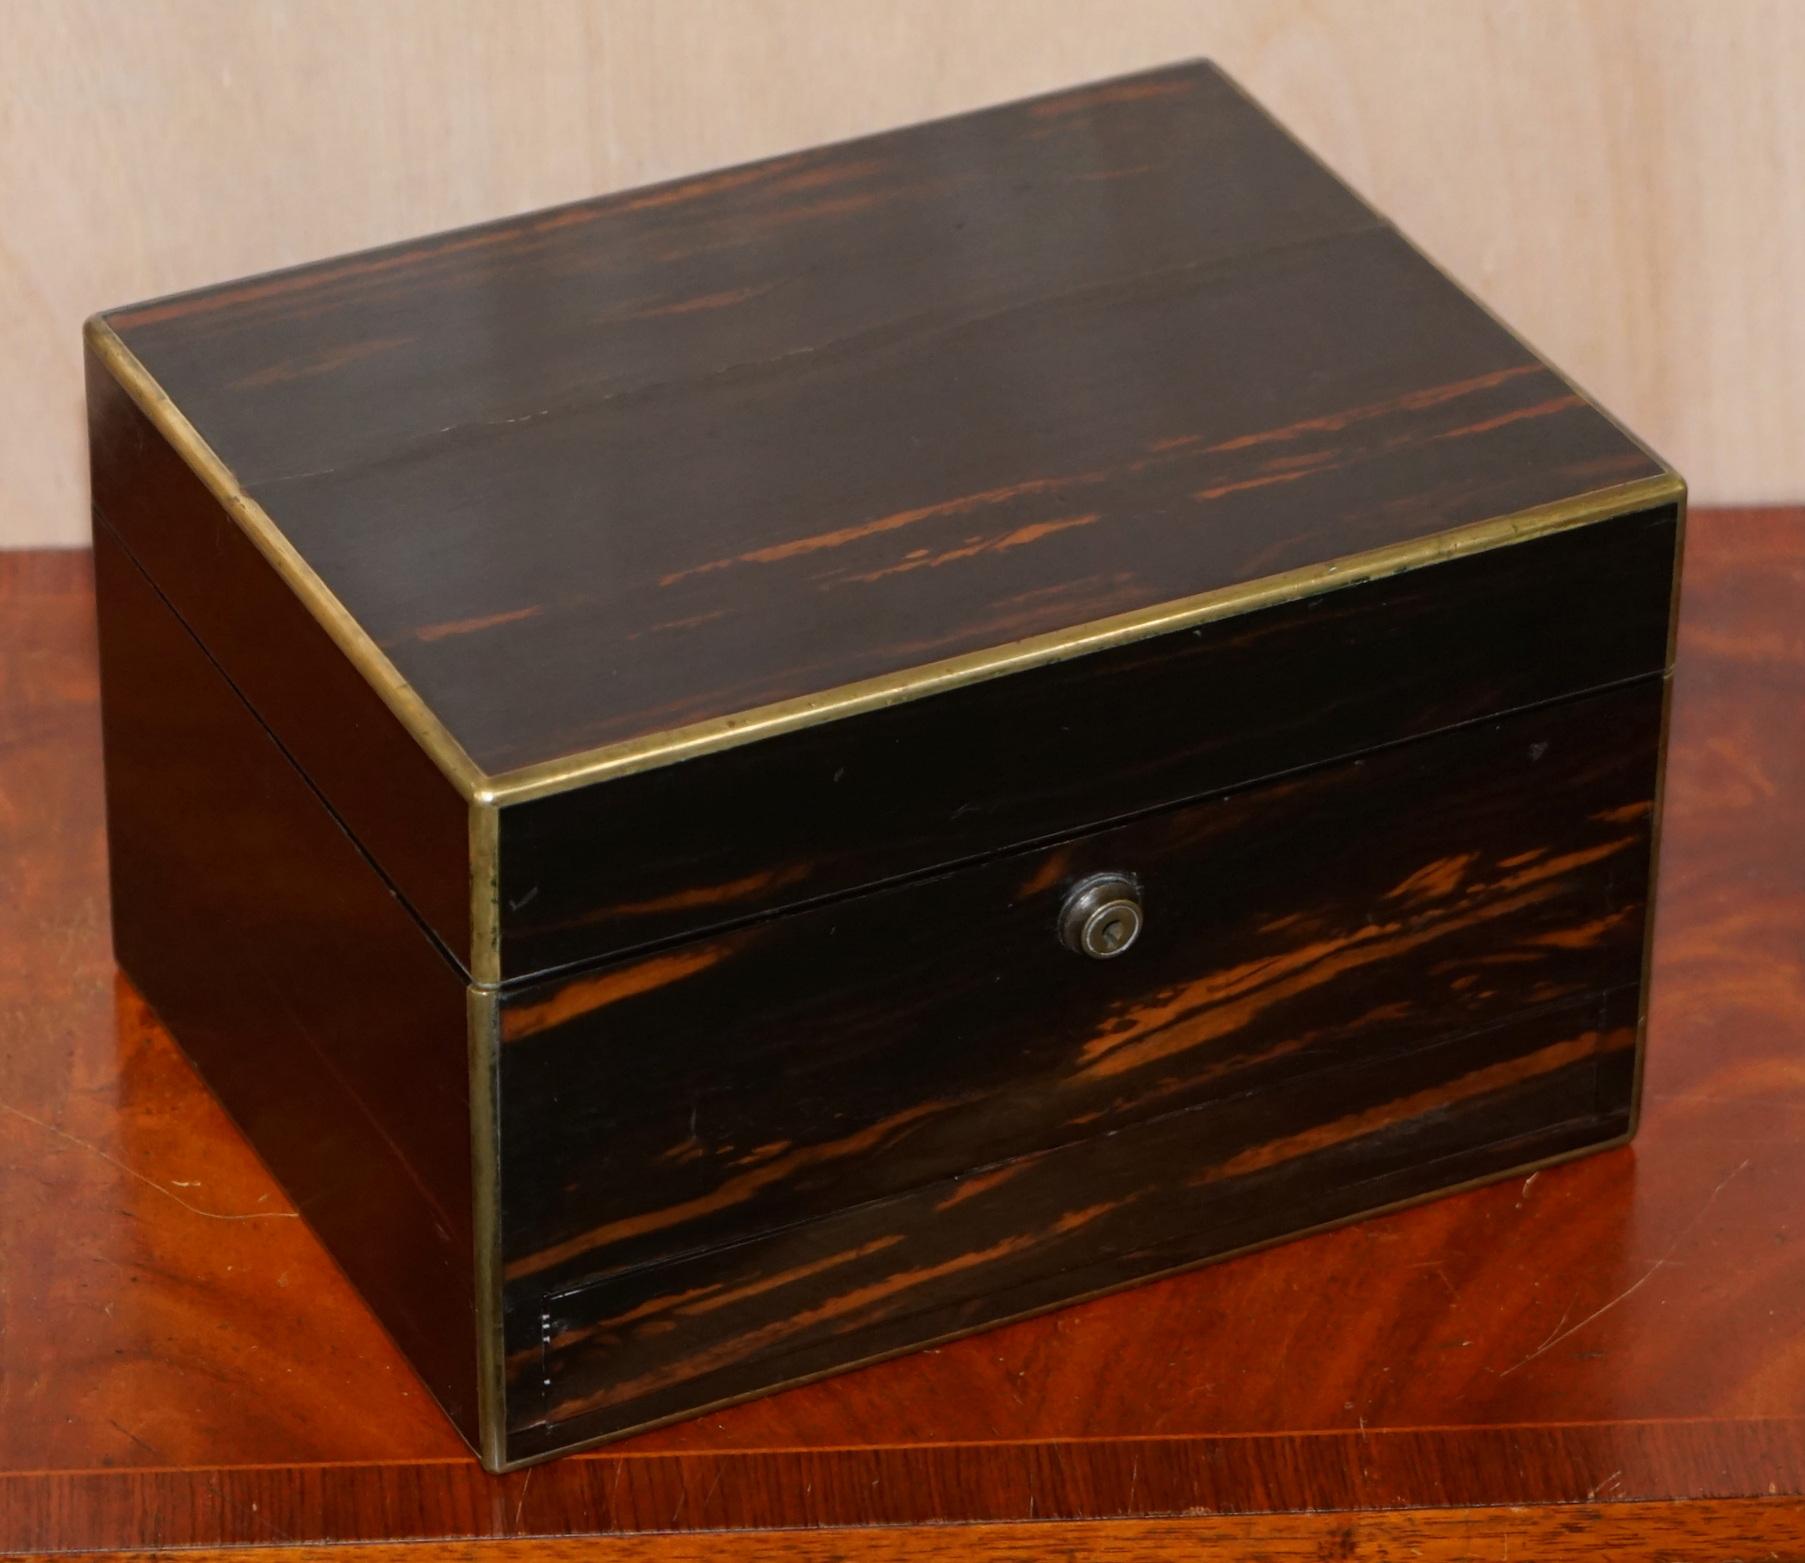 We are delighted to offer for sale this very rare 1867 sterling silver hallmarked Asprey 166 Bond Street London Coromandel wood vanity dressing table box

A very rare and high quality collectable piece, the box is solid Coromandel wood with brass